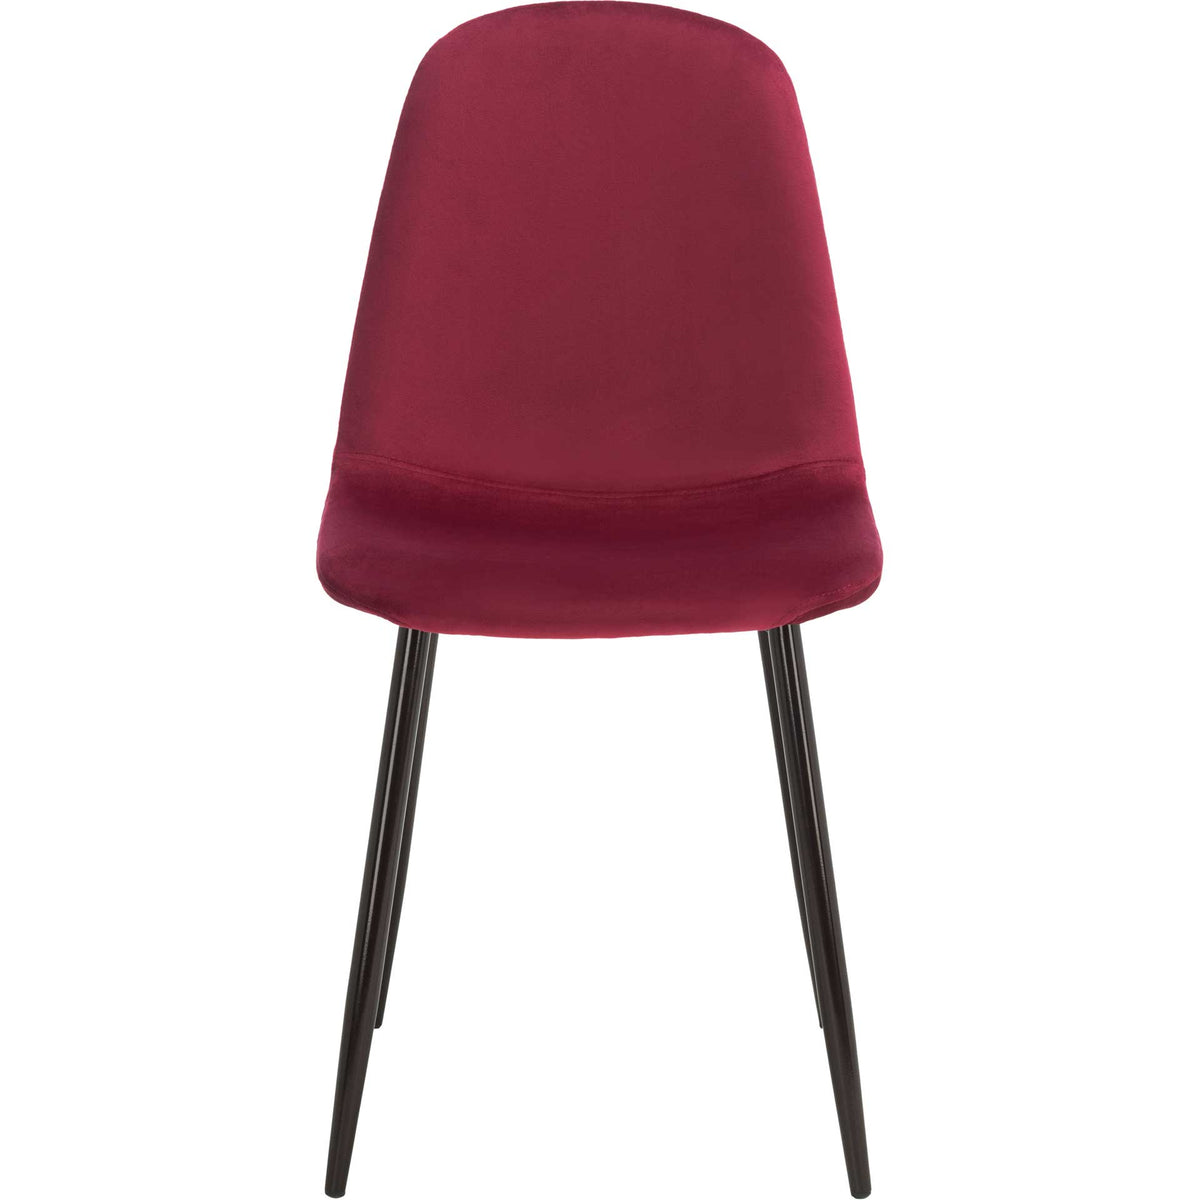 Blaize Dining Chair Magenta/Brown (Set of 2)